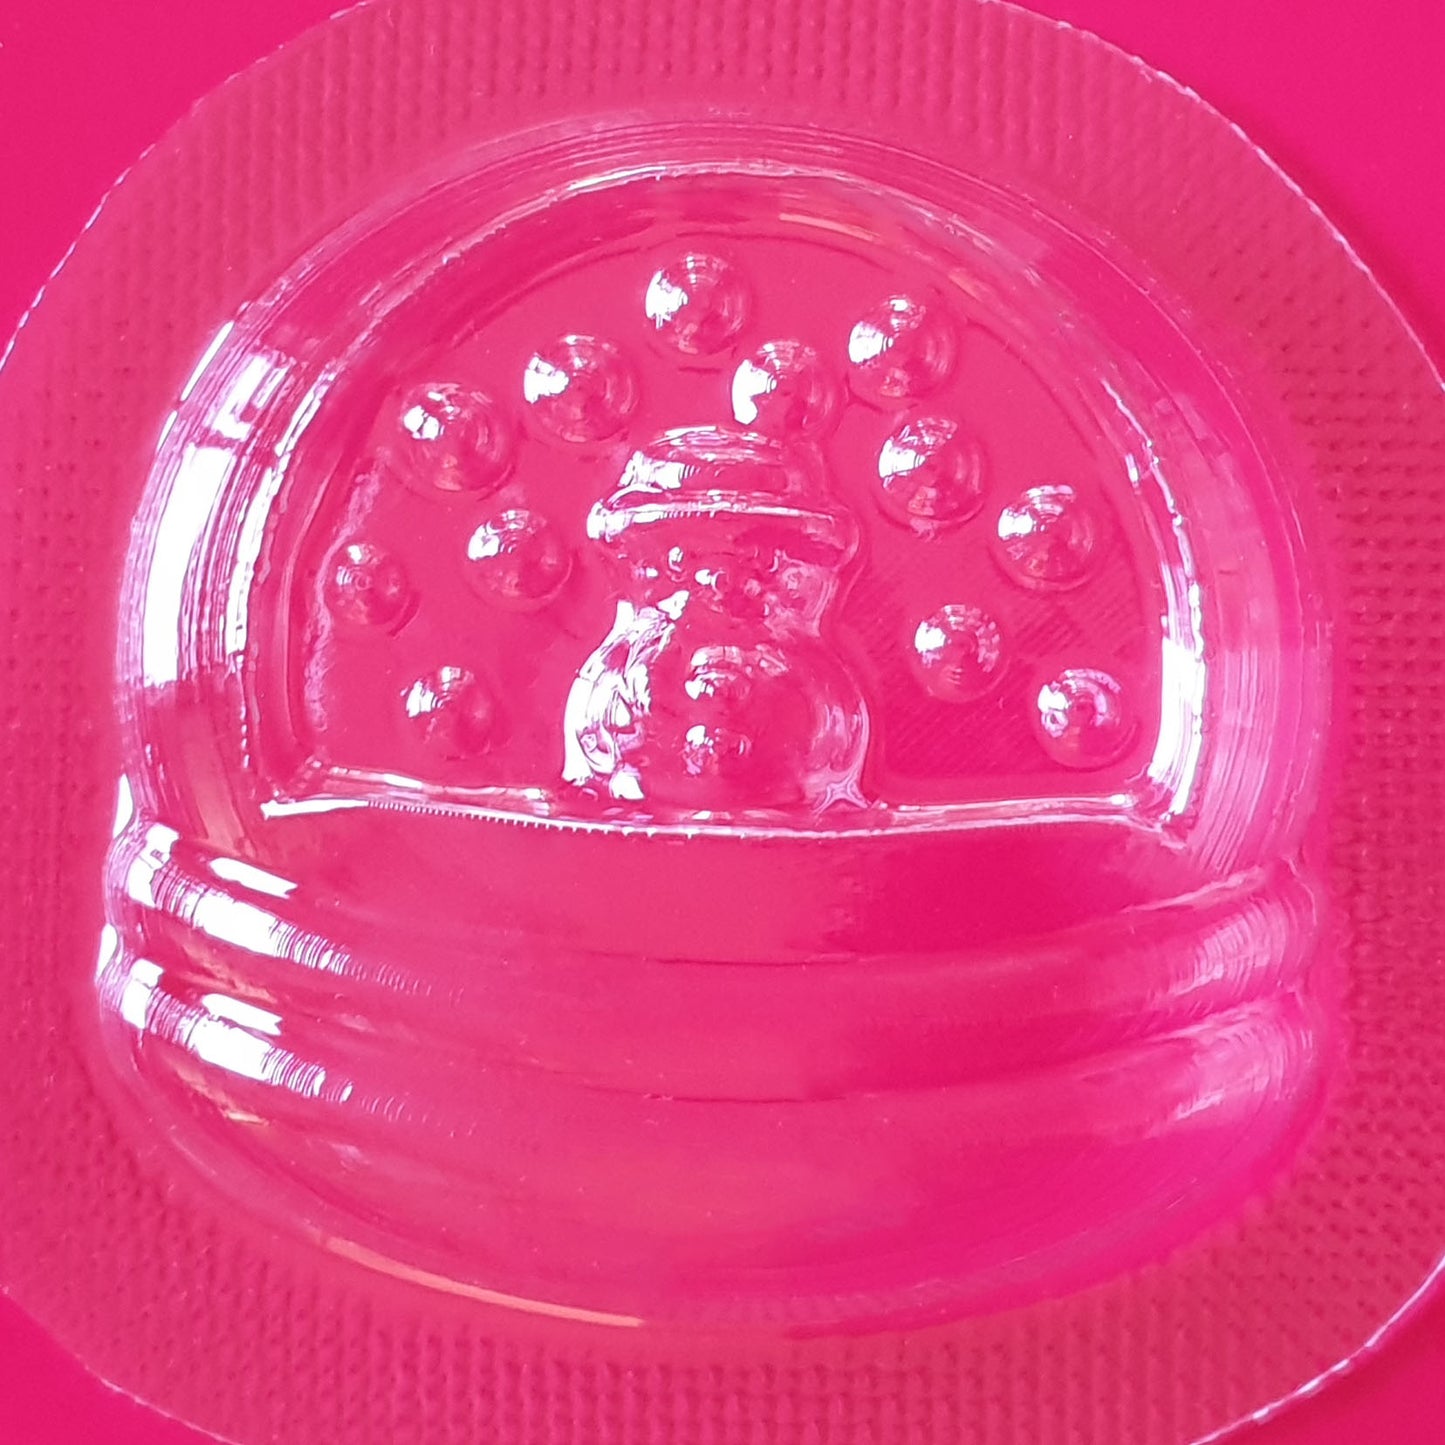 Snow Globe Mould | Truly Personal | Bath Bomb, Soap, Resin, Chocolate, Jelly, Wax Melts Mold